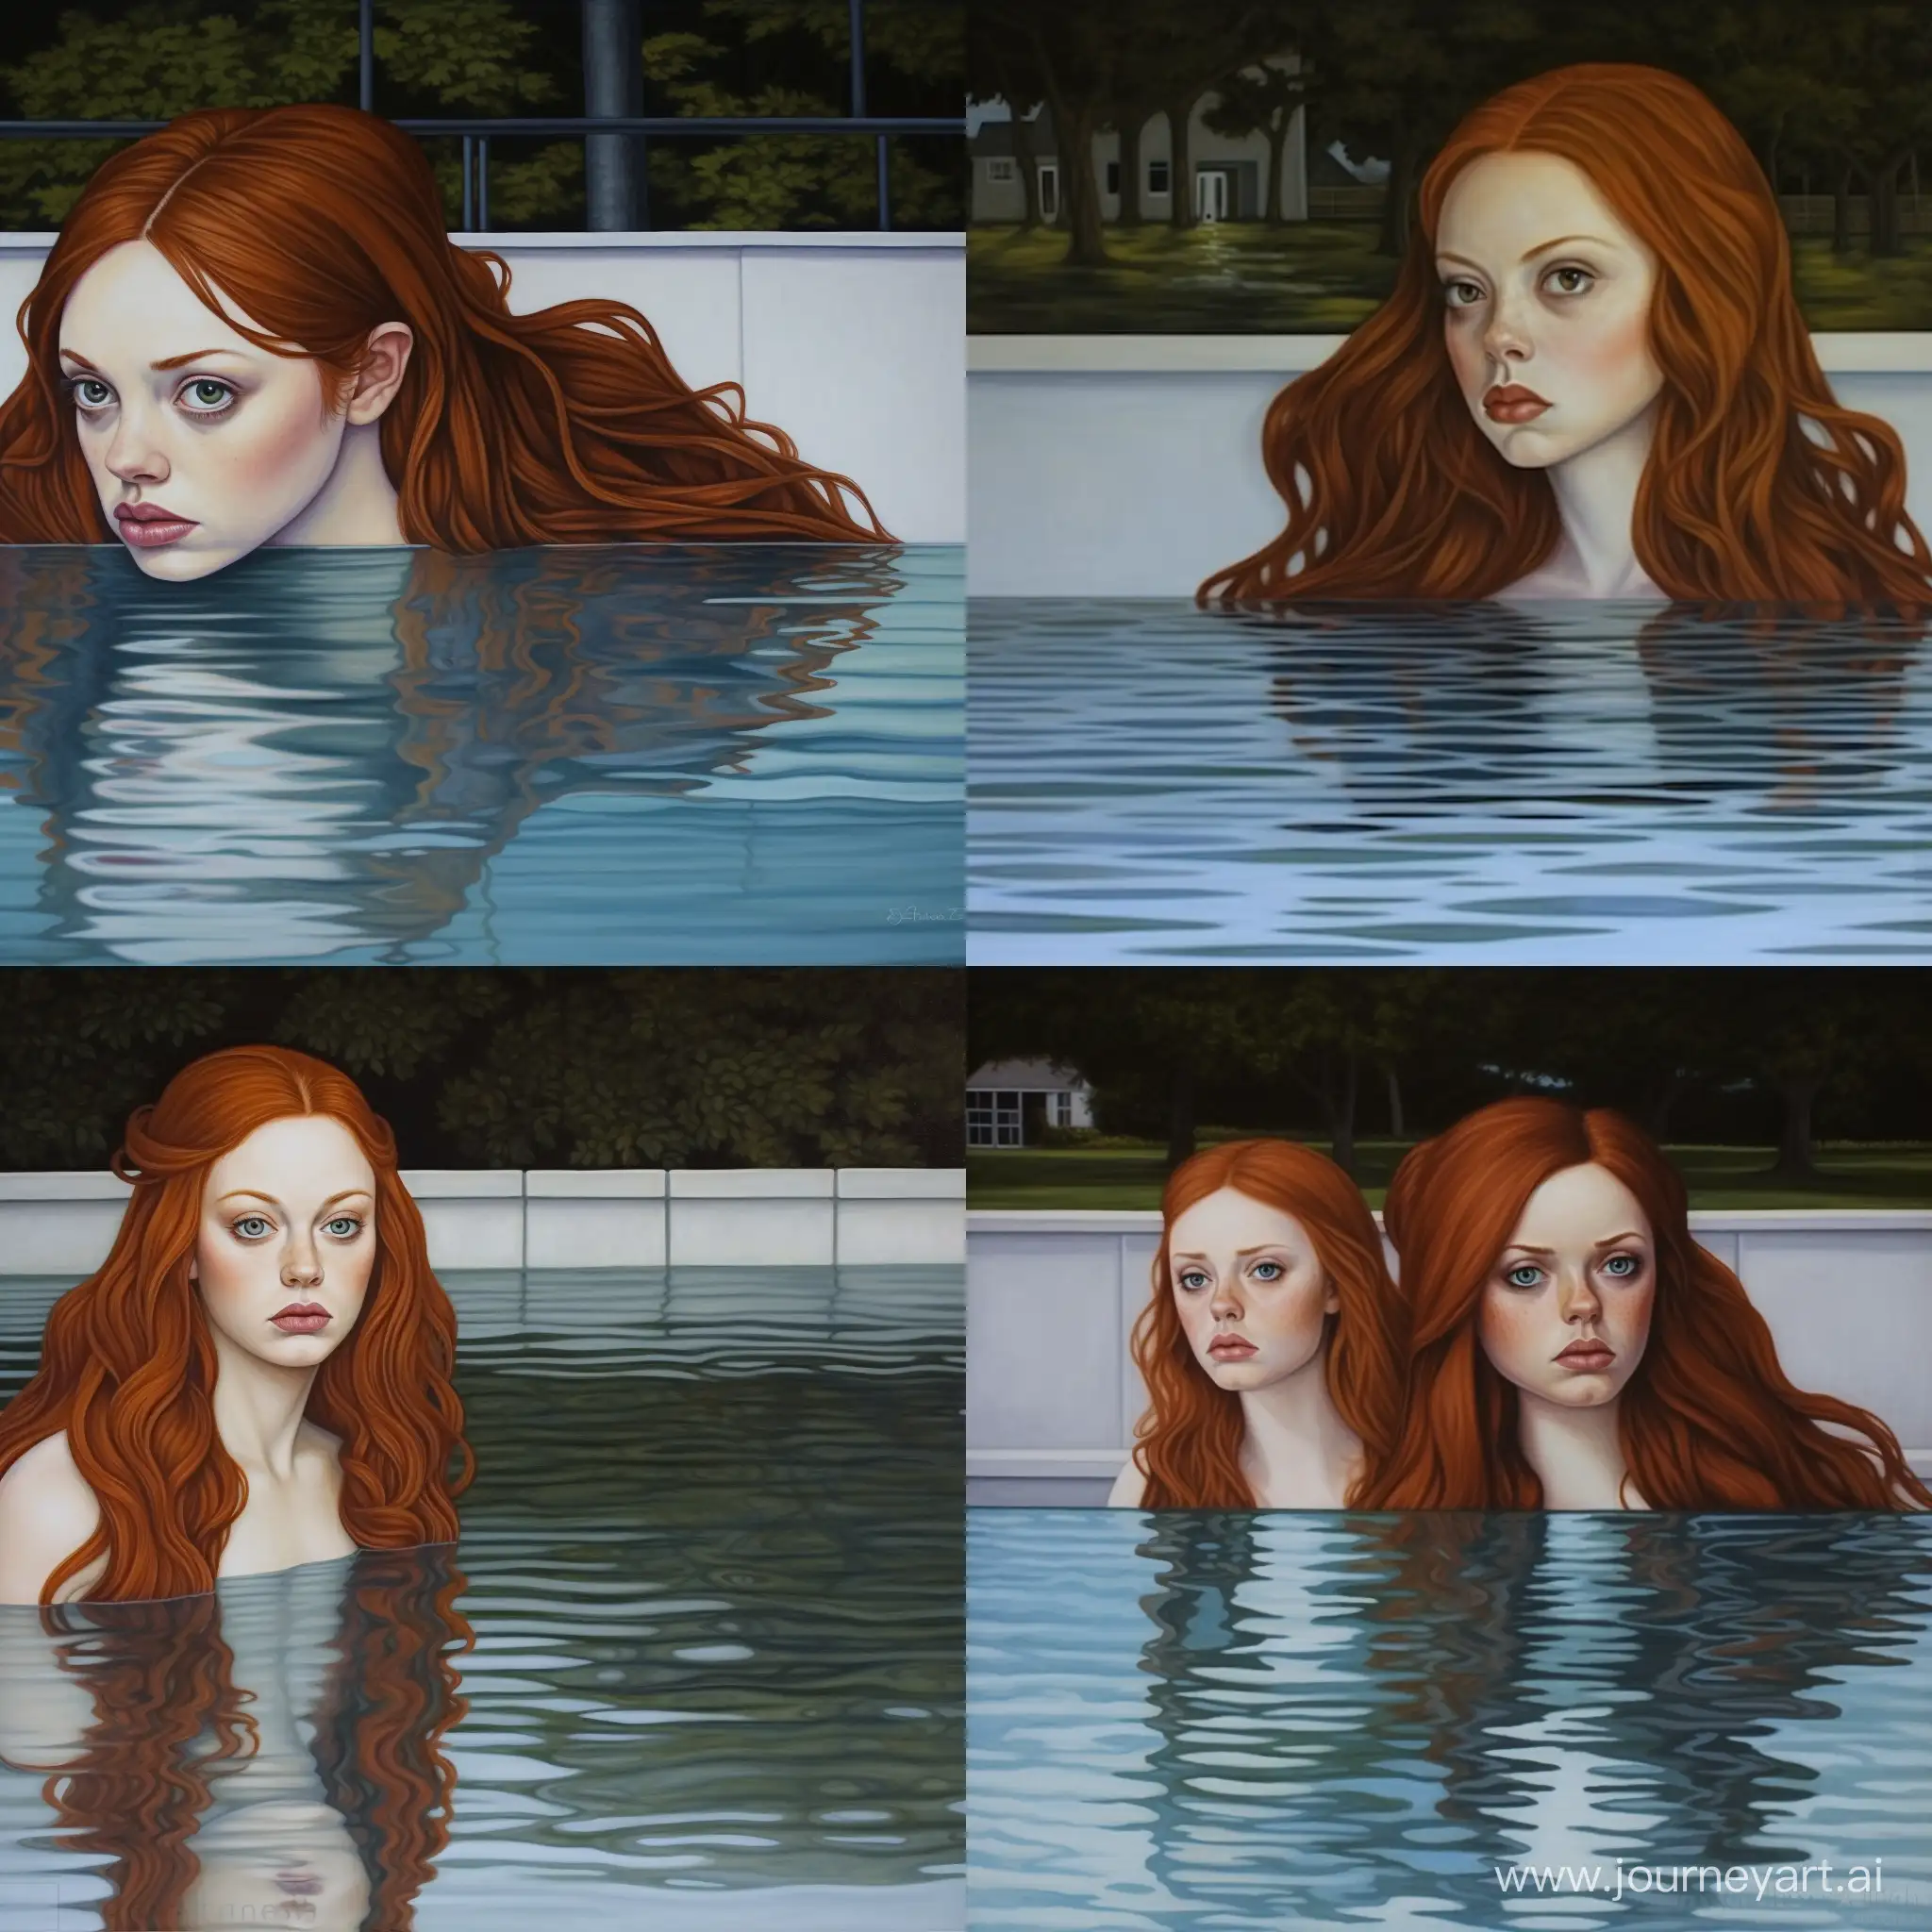 RedHaired-Twins-Enjoying-Pool-Time